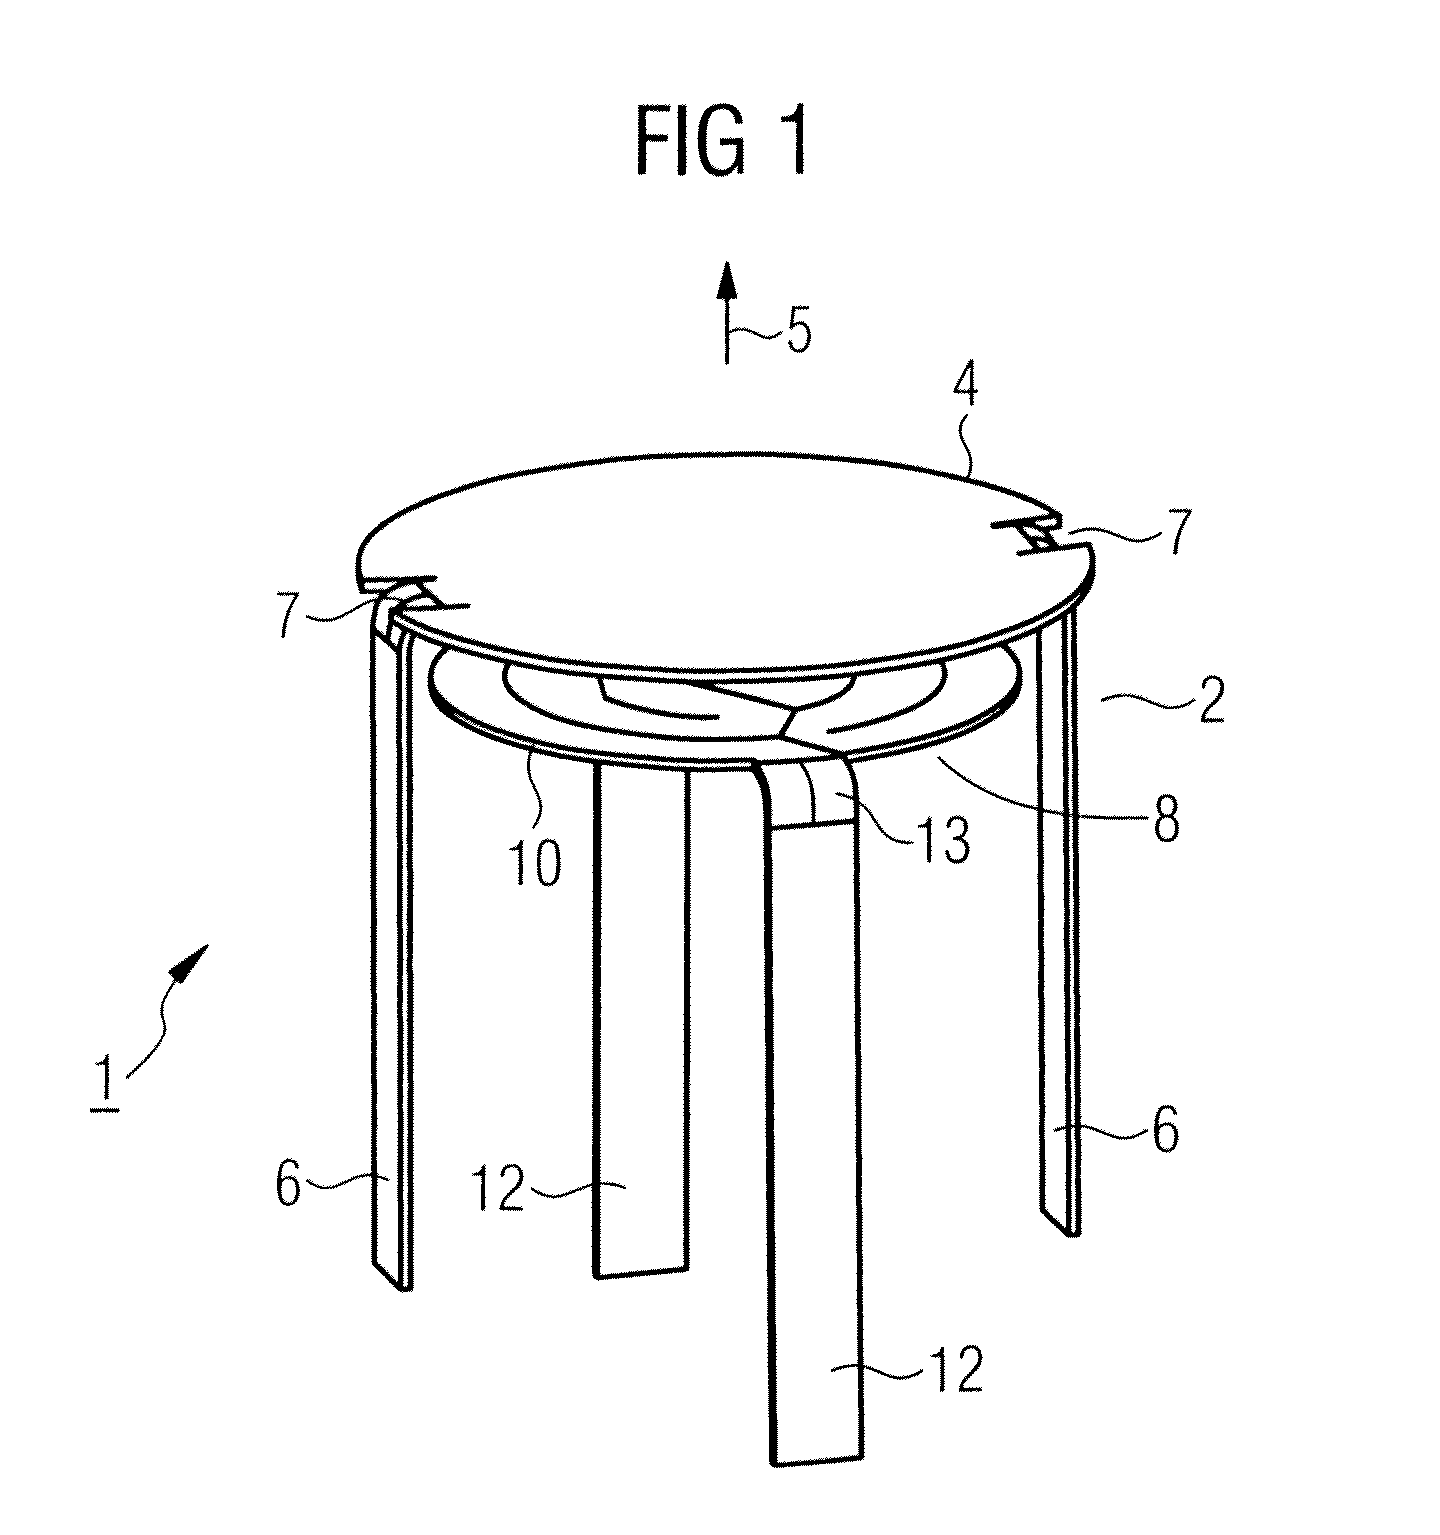 Thermionic emission device